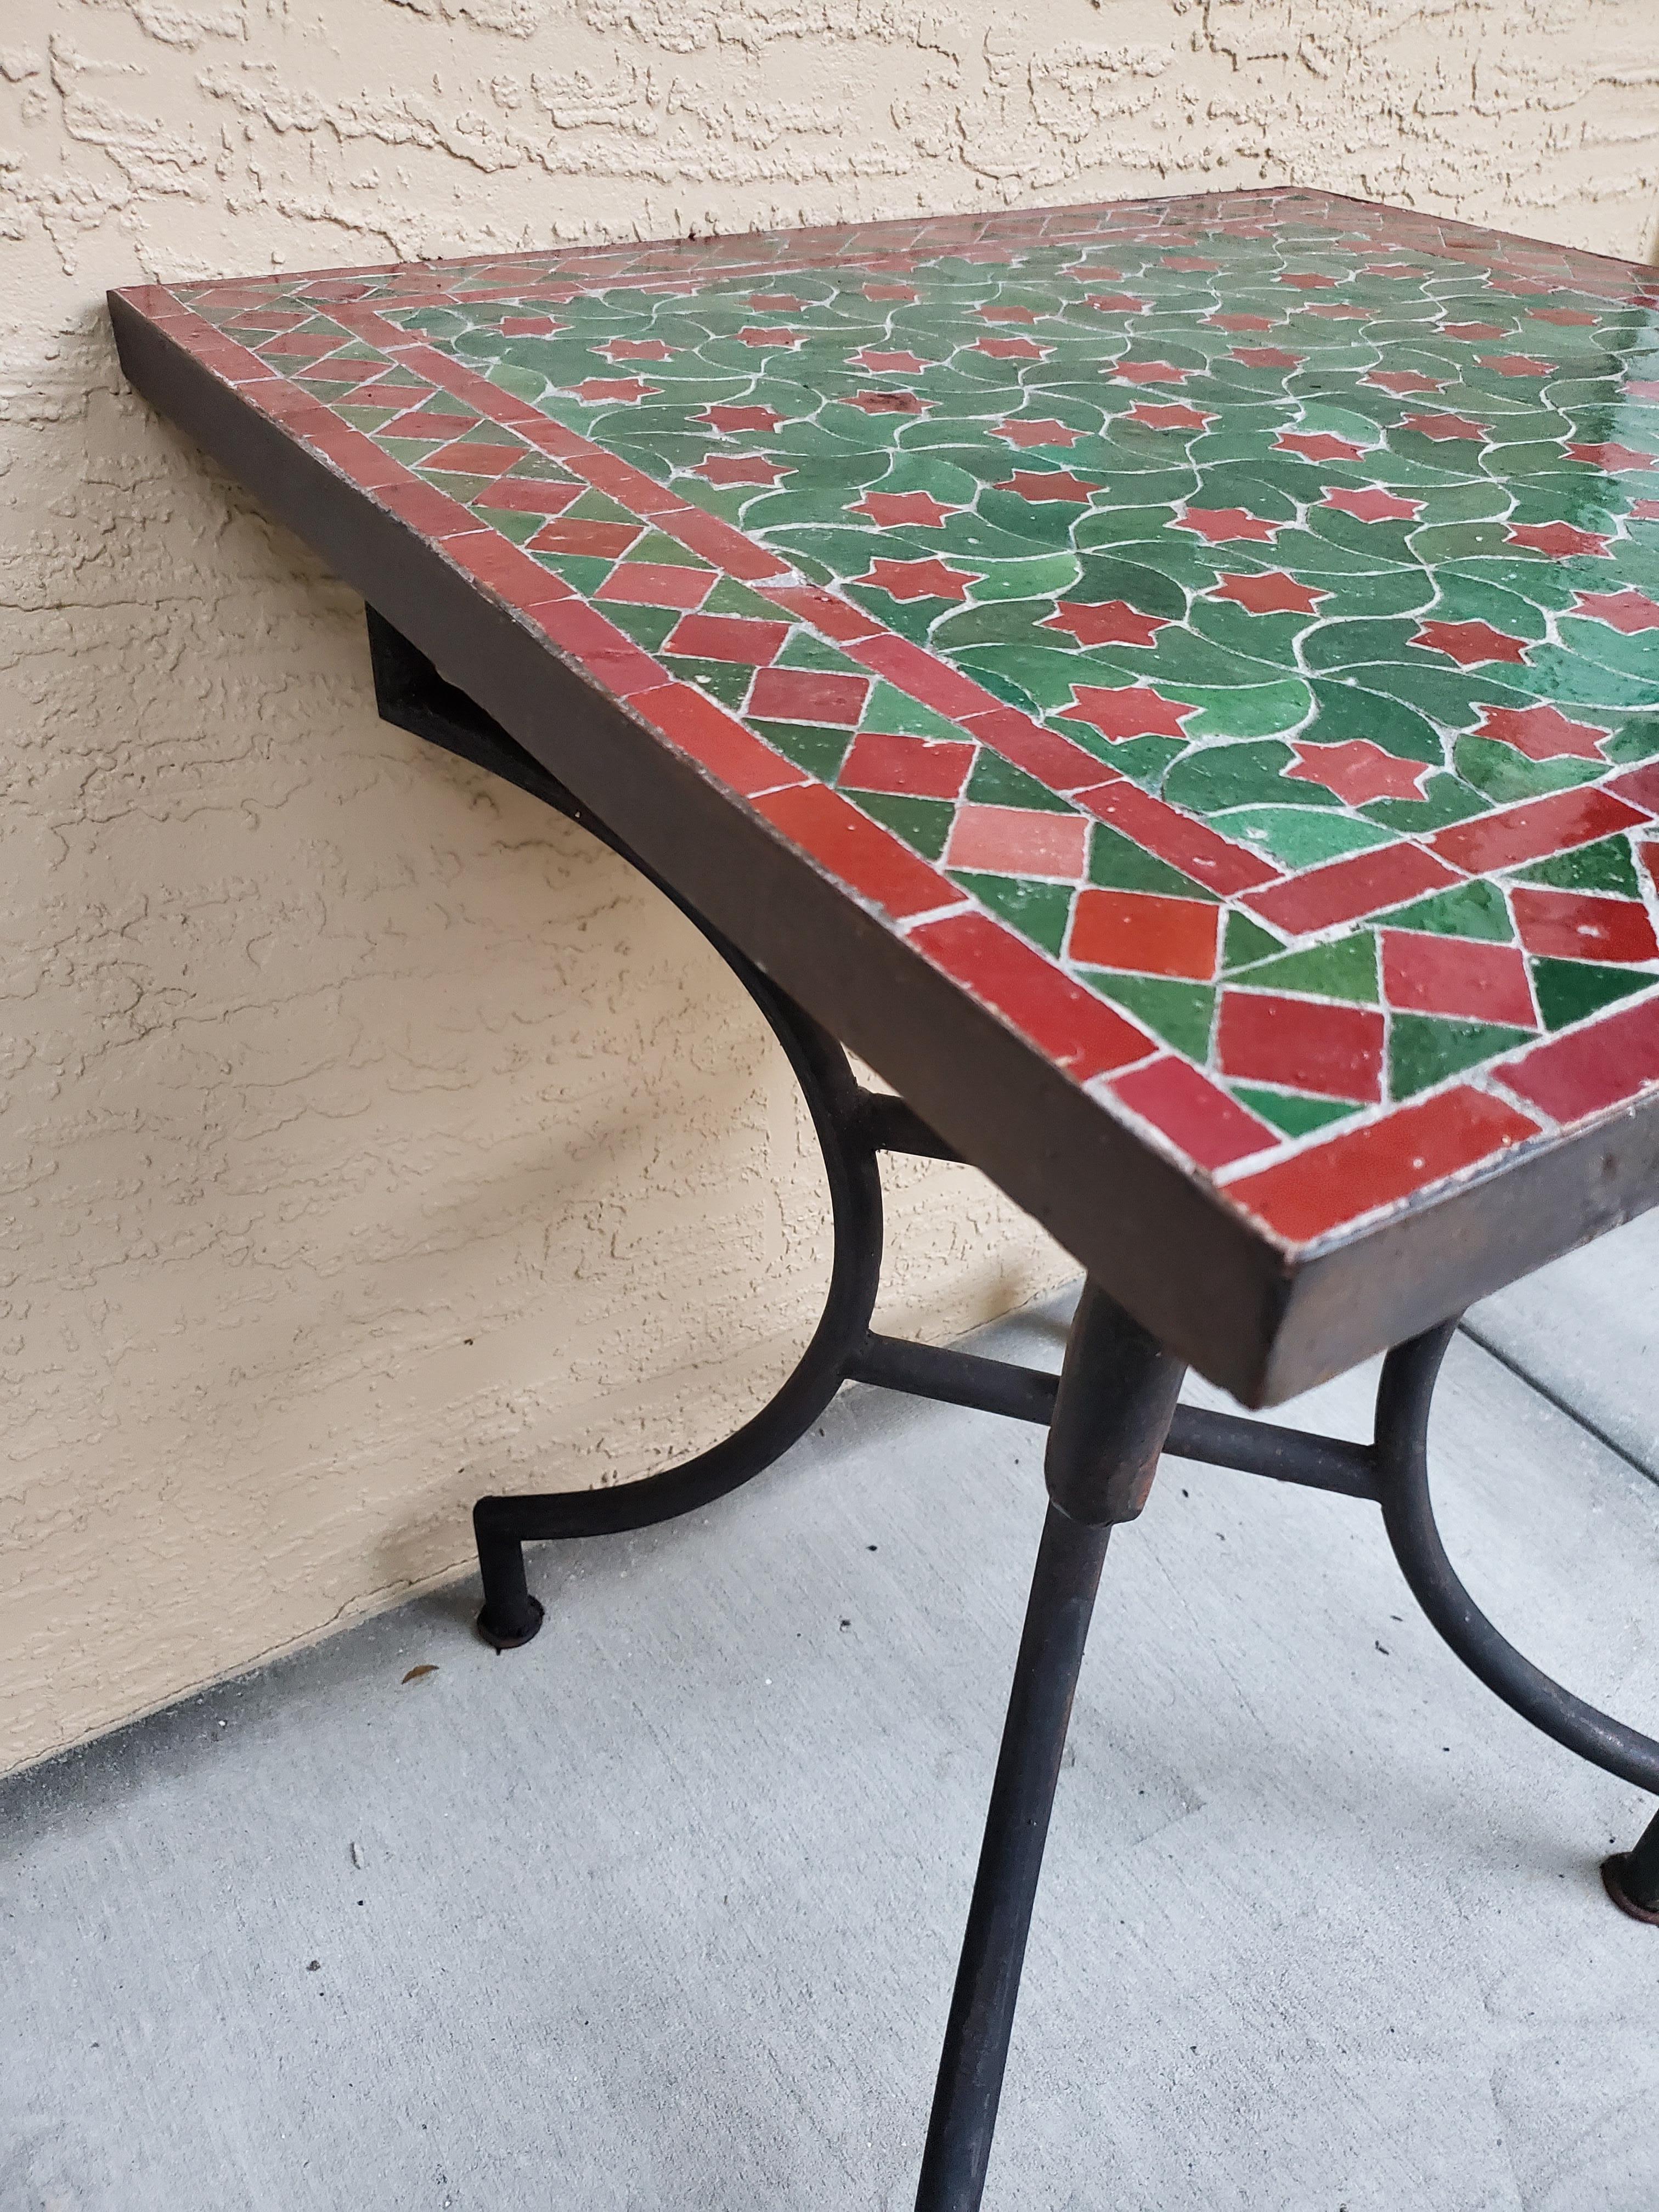 Burgundy and Green Moroccan Mosaic Table In New Condition For Sale In Orlando, FL